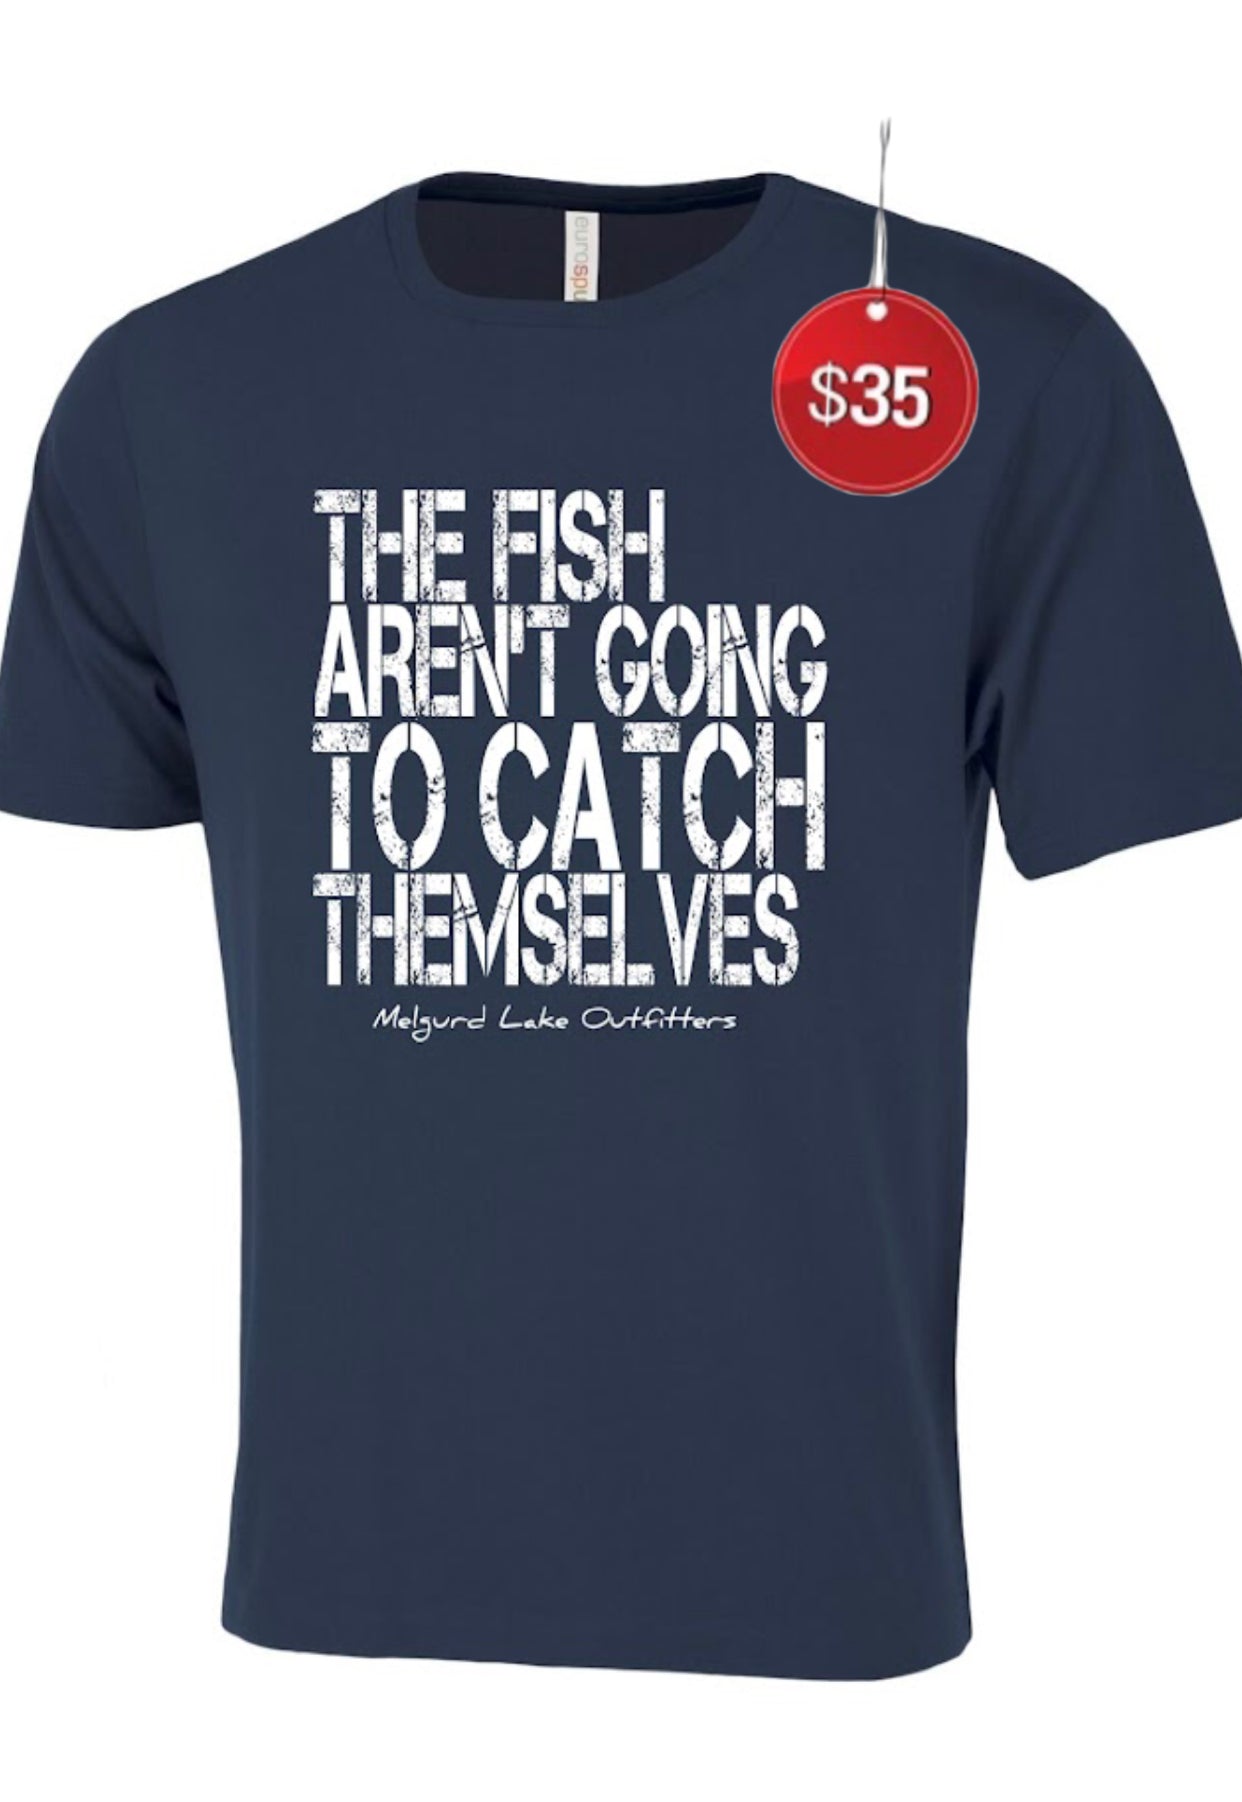 Tee Catch at Navy Edition taken $15 Limited Outfitters – Melgurd Lake Discount Themselves - chec